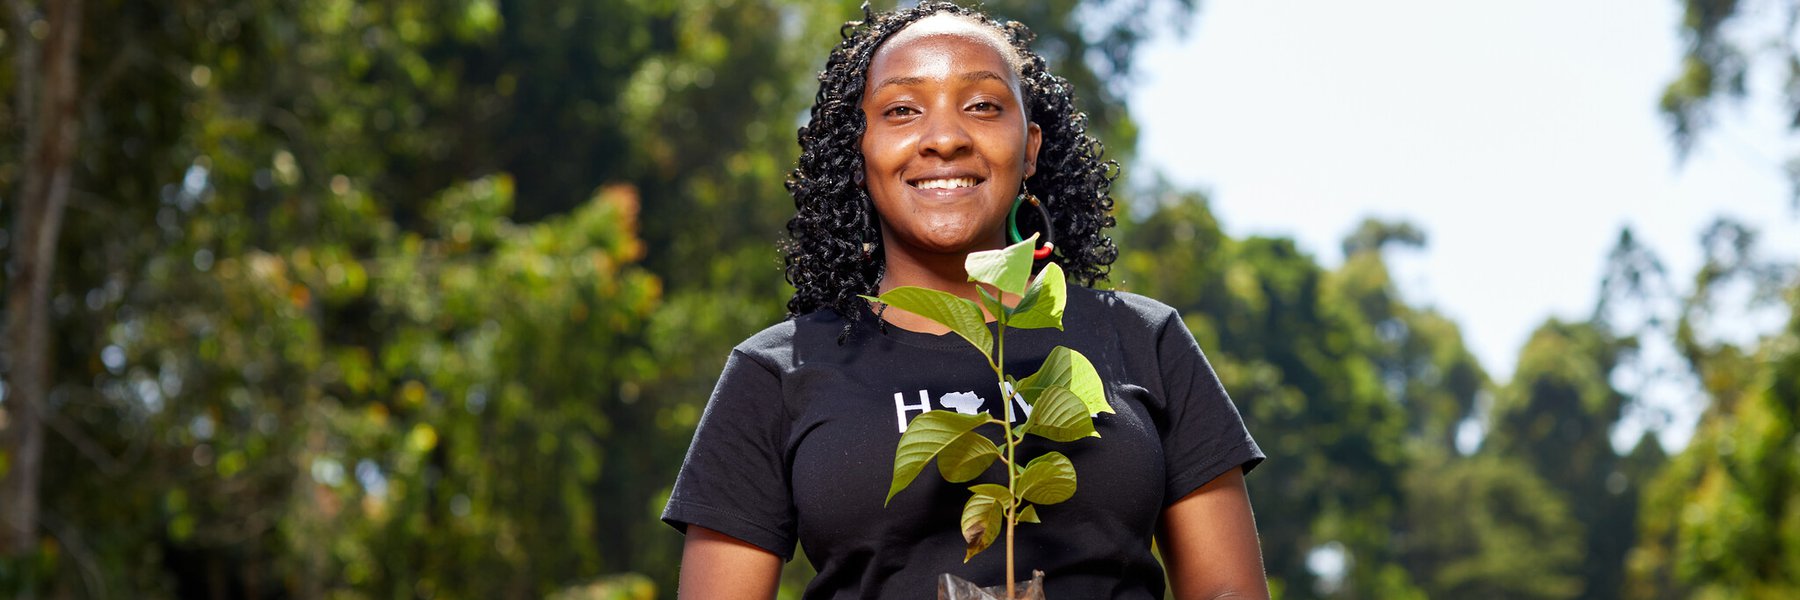 Climate activist and youth leader Elizabeth holds a sapling. Credit: Armstrong Too